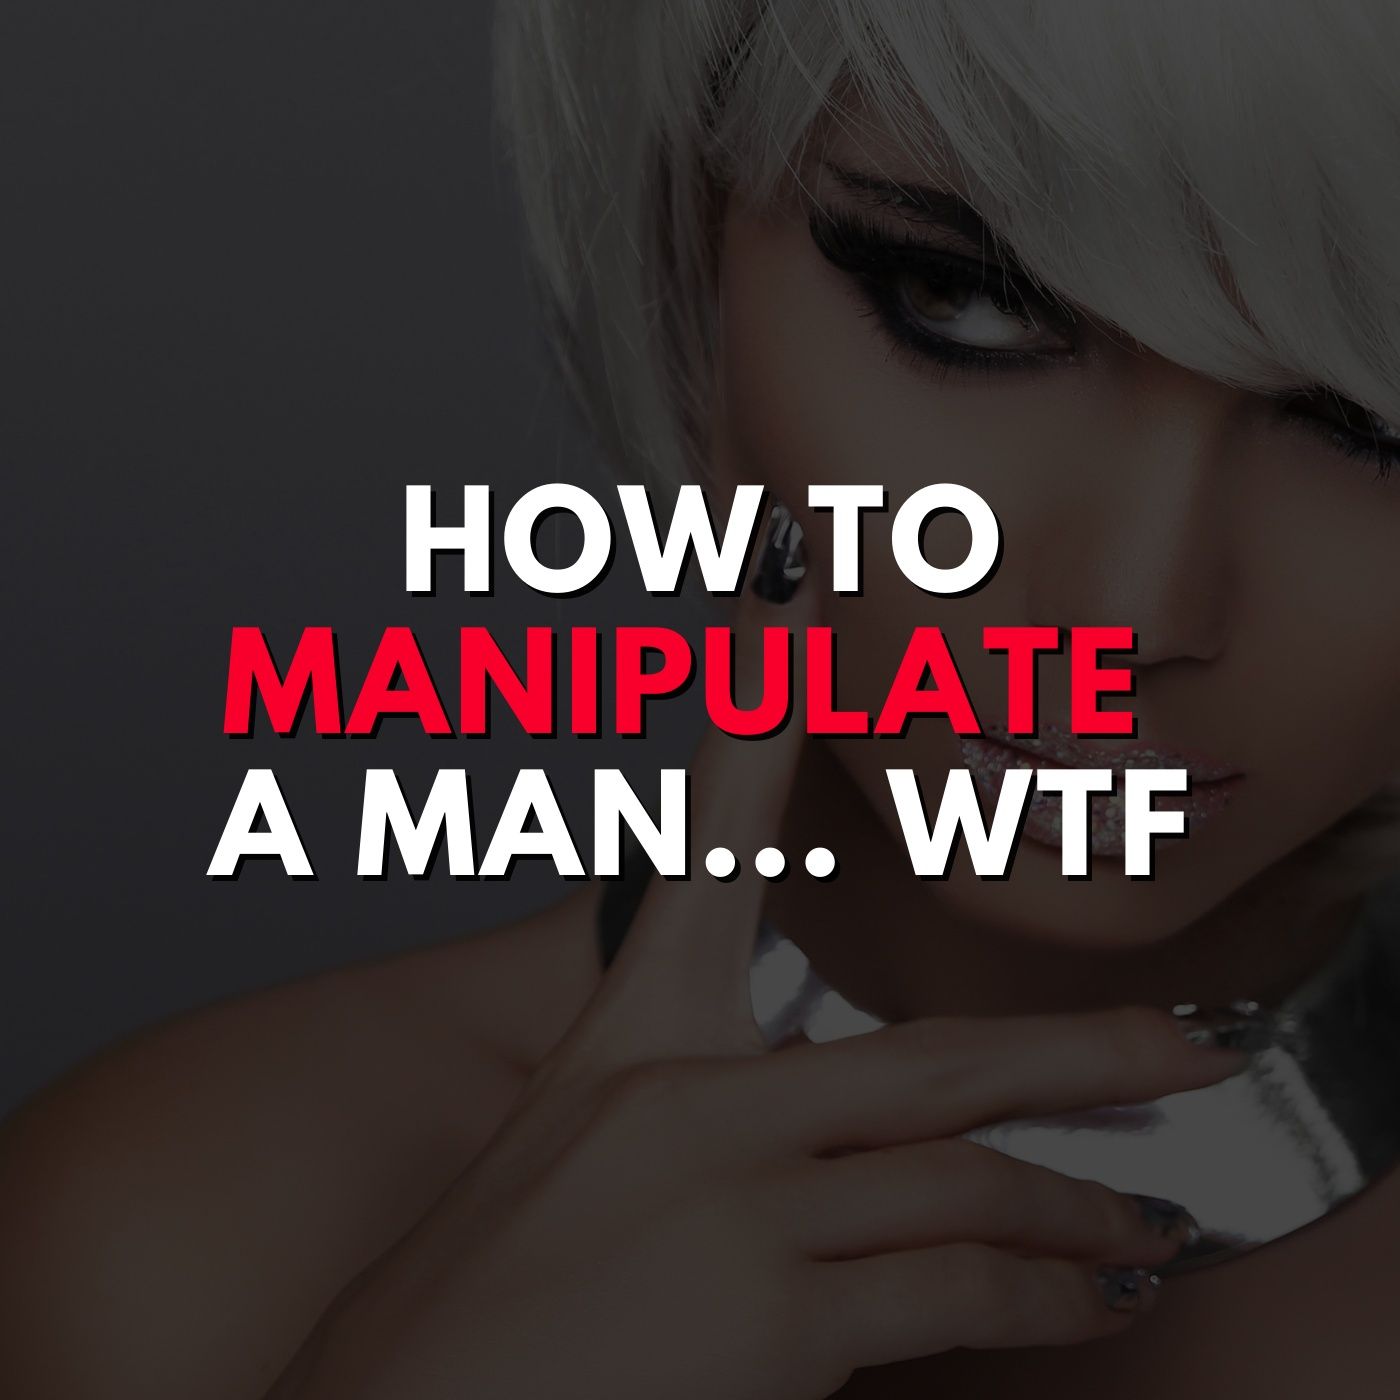 How to manipulate a man... WTF